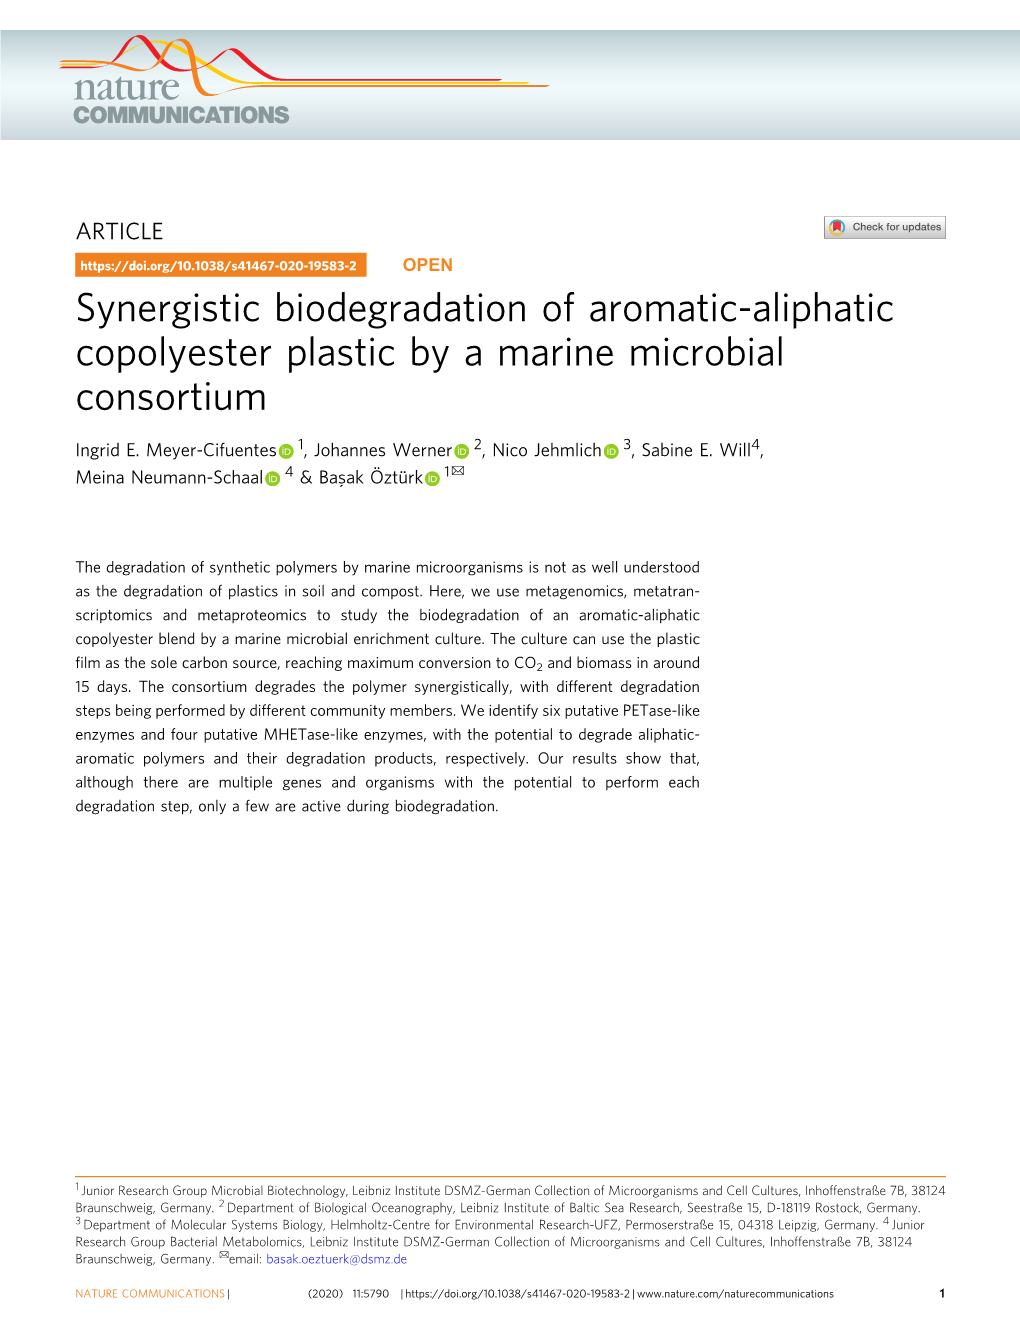 Synergistic Biodegradation of Aromatic-Aliphatic Copolyester Plastic by a Marine Microbial Consortium